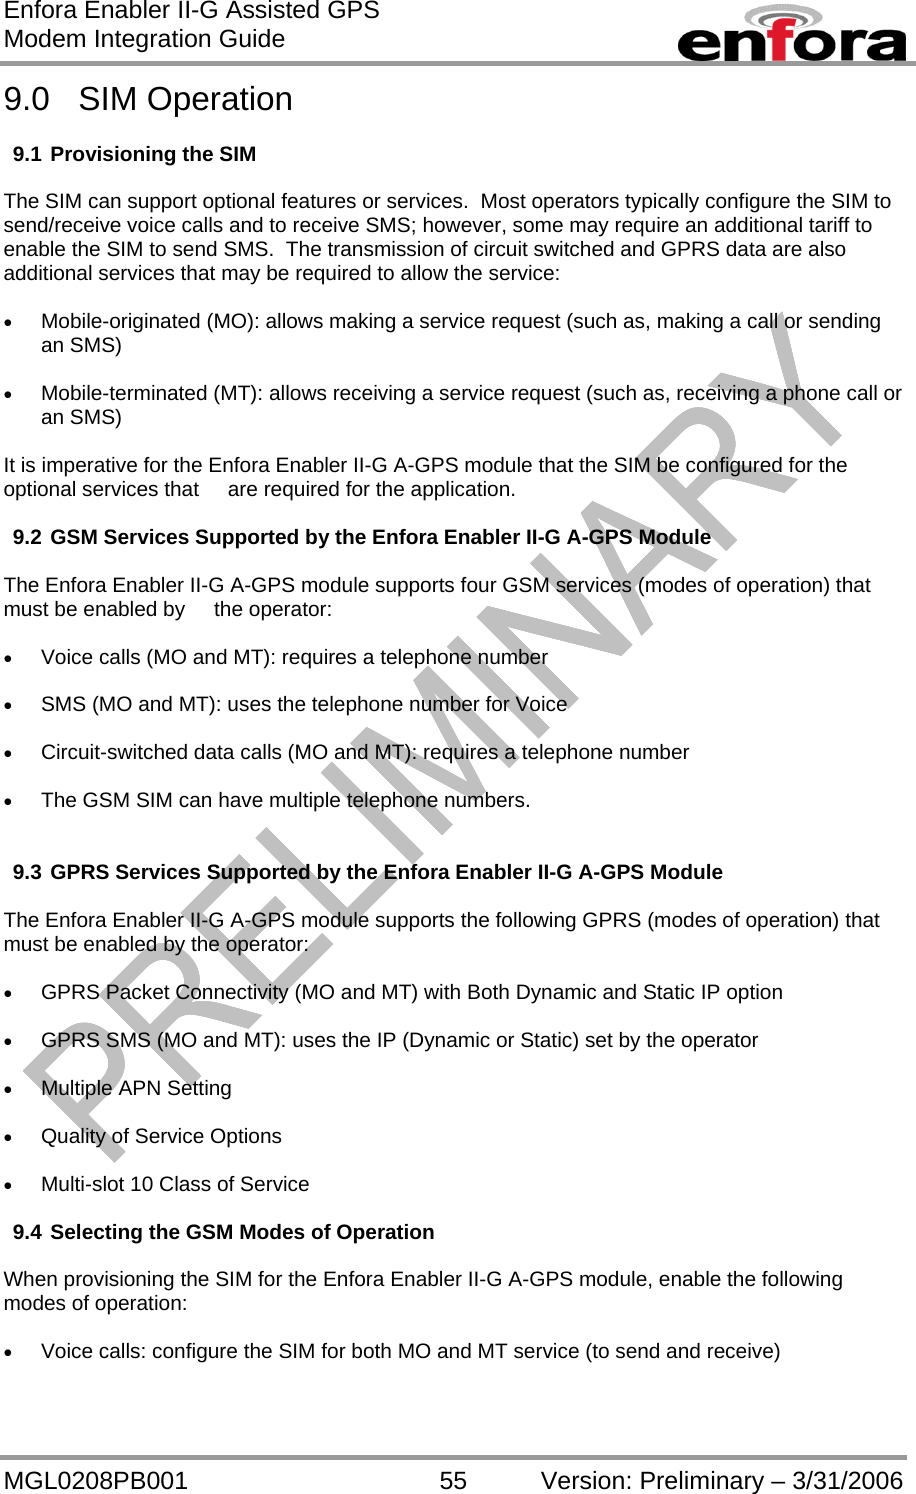 Enfora Enabler II-G Assisted GPS Modem Integration Guide MGL0208PB001 55 Version: Preliminary – 3/31/2006 9.0 SIM Operation  9.1 Provisioning the SIM  The SIM can support optional features or services.  Most operators typically configure the SIM to send/receive voice calls and to receive SMS; however, some may require an additional tariff to enable the SIM to send SMS.  The transmission of circuit switched and GPRS data are also additional services that may be required to allow the service:  •  Mobile-originated (MO): allows making a service request (such as, making a call or sending an SMS)  •  Mobile-terminated (MT): allows receiving a service request (such as, receiving a phone call or an SMS)  It is imperative for the Enfora Enabler II-G A-GPS module that the SIM be configured for the optional services that     are required for the application.  9.2 GSM Services Supported by the Enfora Enabler II-G A-GPS Module  The Enfora Enabler II-G A-GPS module supports four GSM services (modes of operation) that must be enabled by     the operator:  •  Voice calls (MO and MT): requires a telephone number  •  SMS (MO and MT): uses the telephone number for Voice  •  Circuit-switched data calls (MO and MT): requires a telephone number  •  The GSM SIM can have multiple telephone numbers.   9.3 GPRS Services Supported by the Enfora Enabler II-G A-GPS Module  The Enfora Enabler II-G A-GPS module supports the following GPRS (modes of operation) that must be enabled by the operator:  •  GPRS Packet Connectivity (MO and MT) with Both Dynamic and Static IP option  •  GPRS SMS (MO and MT): uses the IP (Dynamic or Static) set by the operator  •  Multiple APN Setting  •  Quality of Service Options  •  Multi-slot 10 Class of Service  9.4 Selecting the GSM Modes of Operation  When provisioning the SIM for the Enfora Enabler II-G A-GPS module, enable the following modes of operation:  •  Voice calls: configure the SIM for both MO and MT service (to send and receive)  